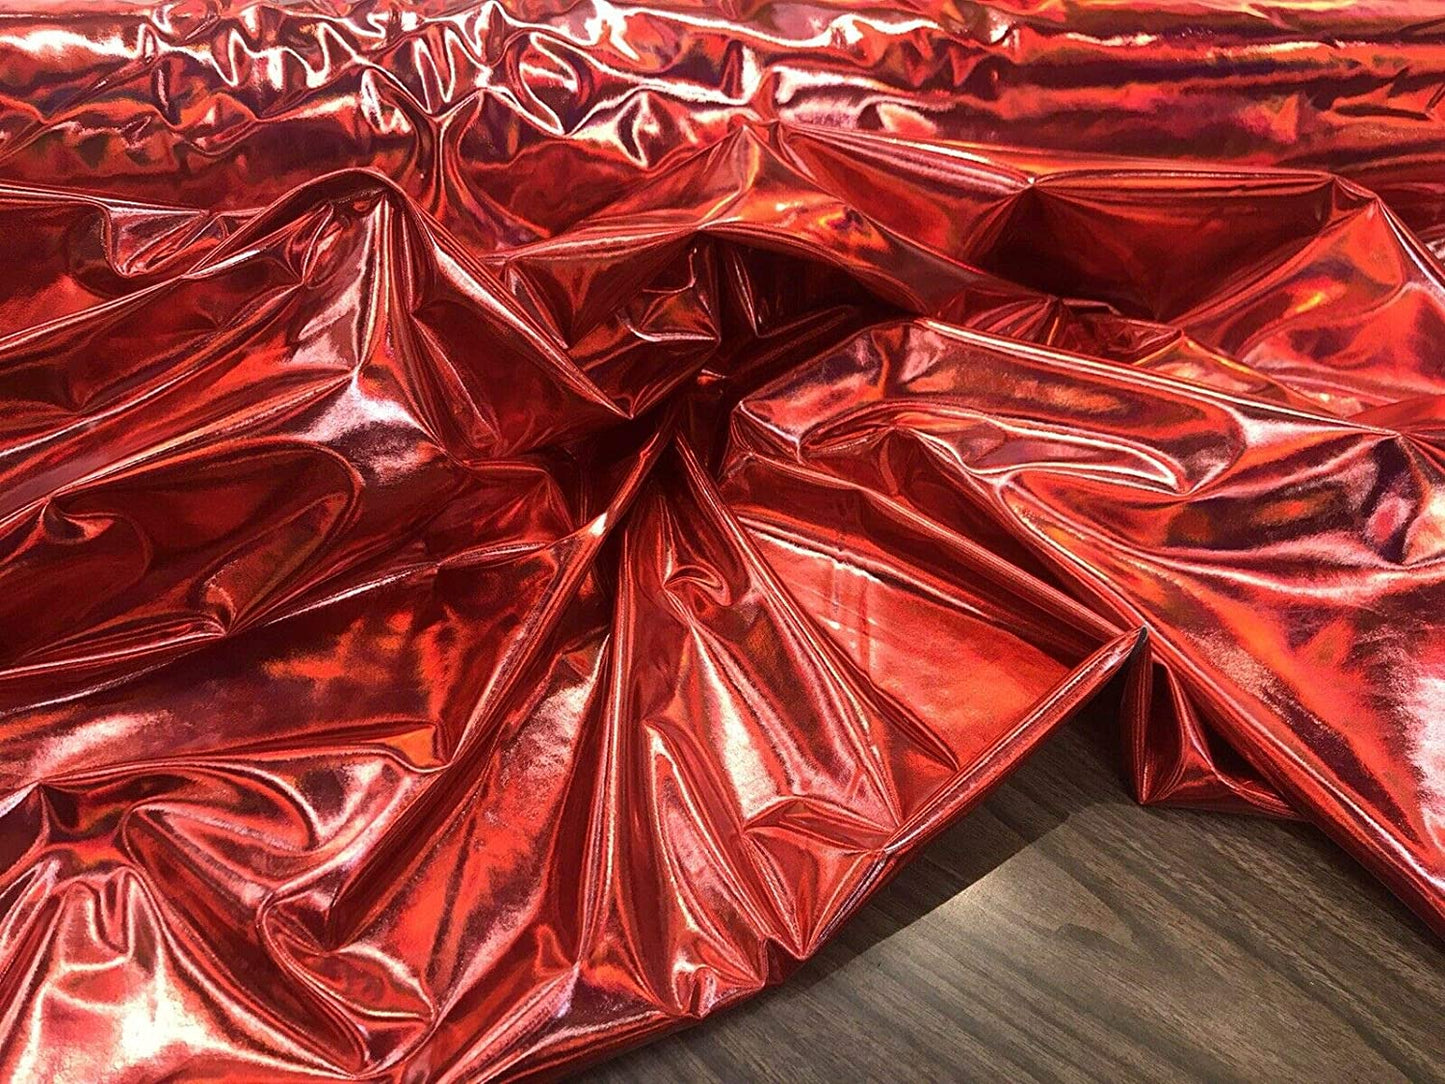 54" Wide Faux Leather Vinyl 4 Way Stretch Spandex Dance Wear Fabric by The Yard (Red, REFRACTIVE Hologram)